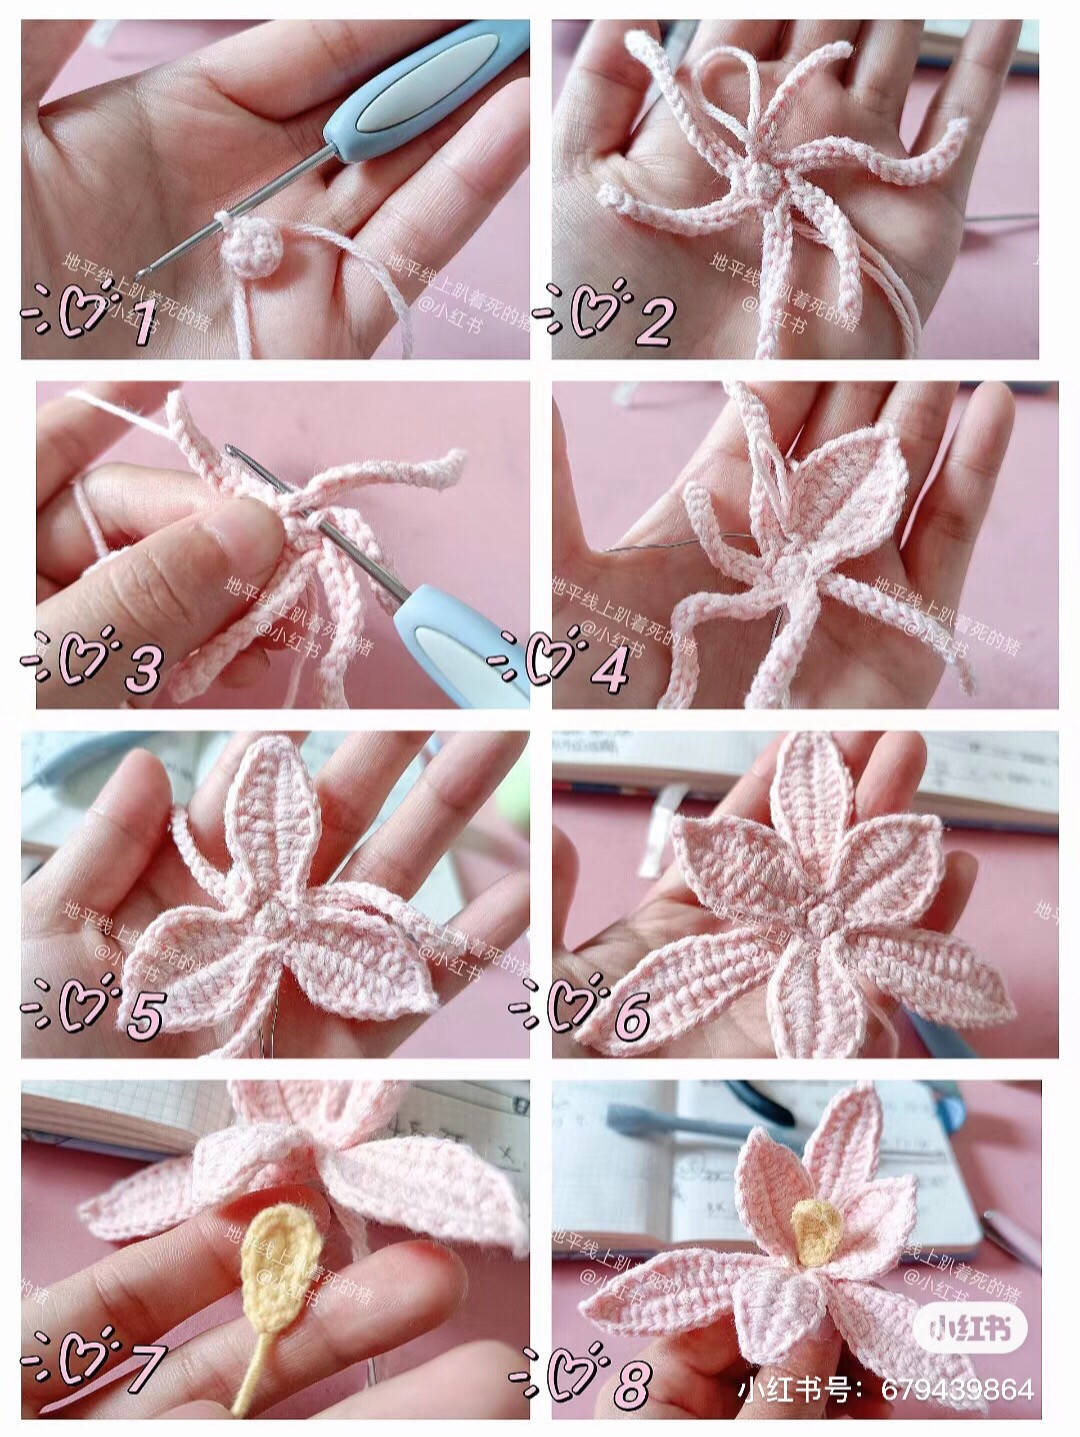 Orchid crochet pattern with long leaves and small petals